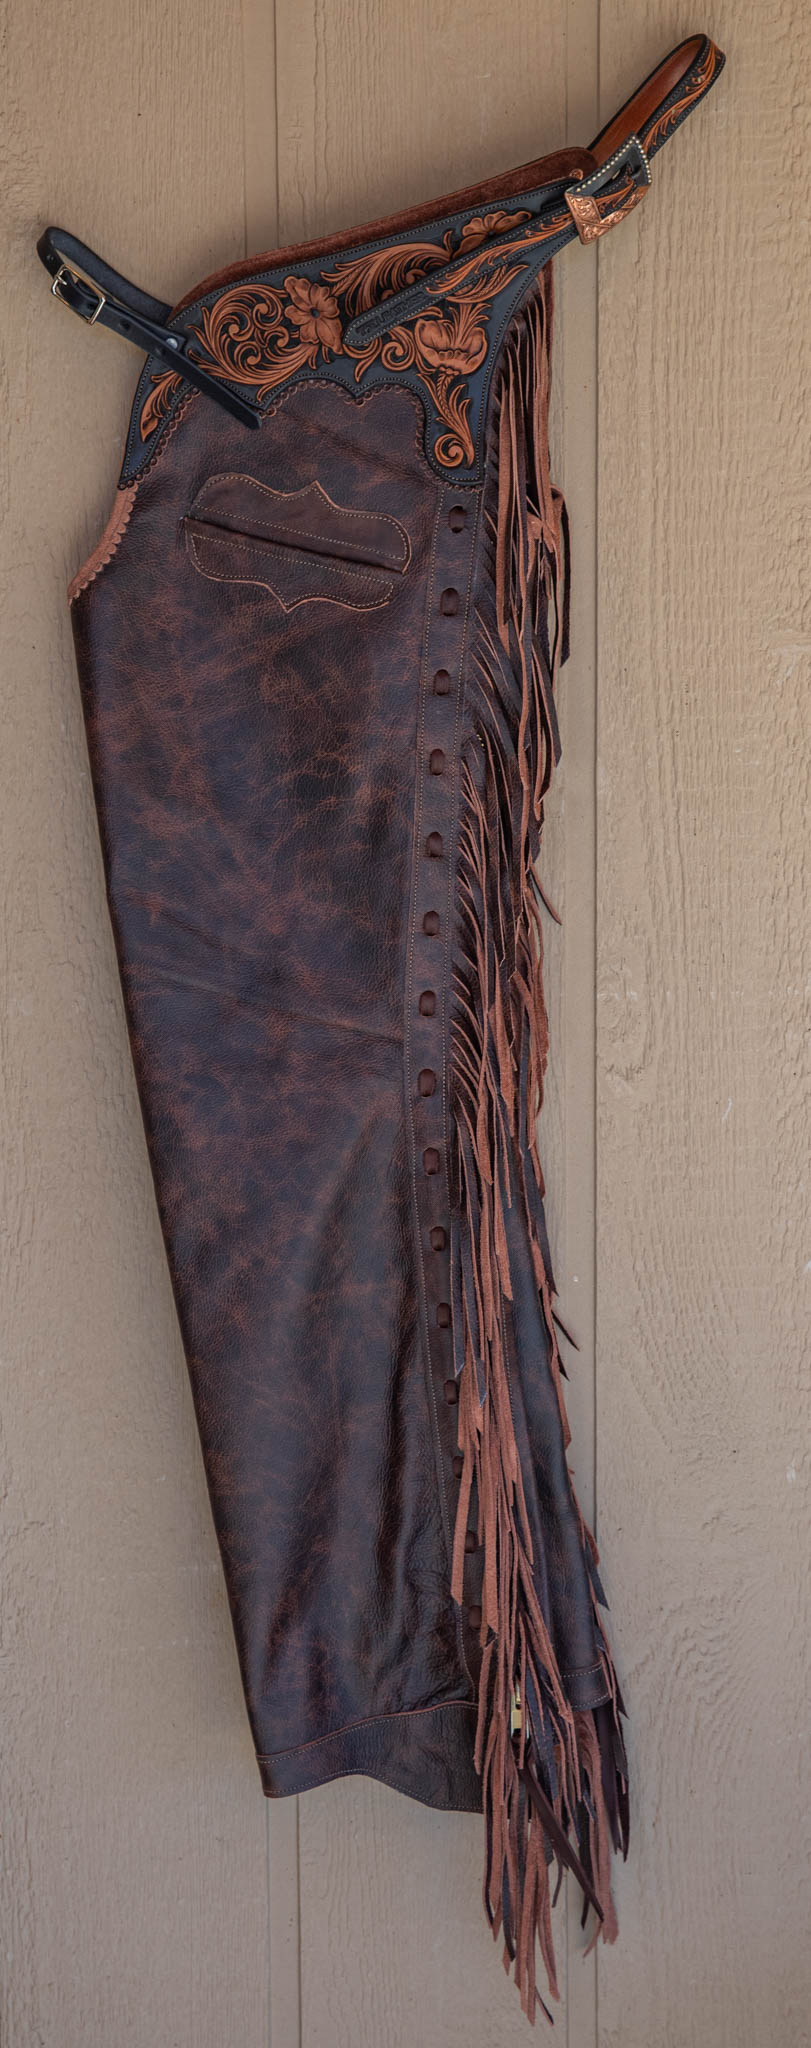 Dark Brown Smooth-out Chaps w/ Black & Light Brown Floral Yokes and Pocket